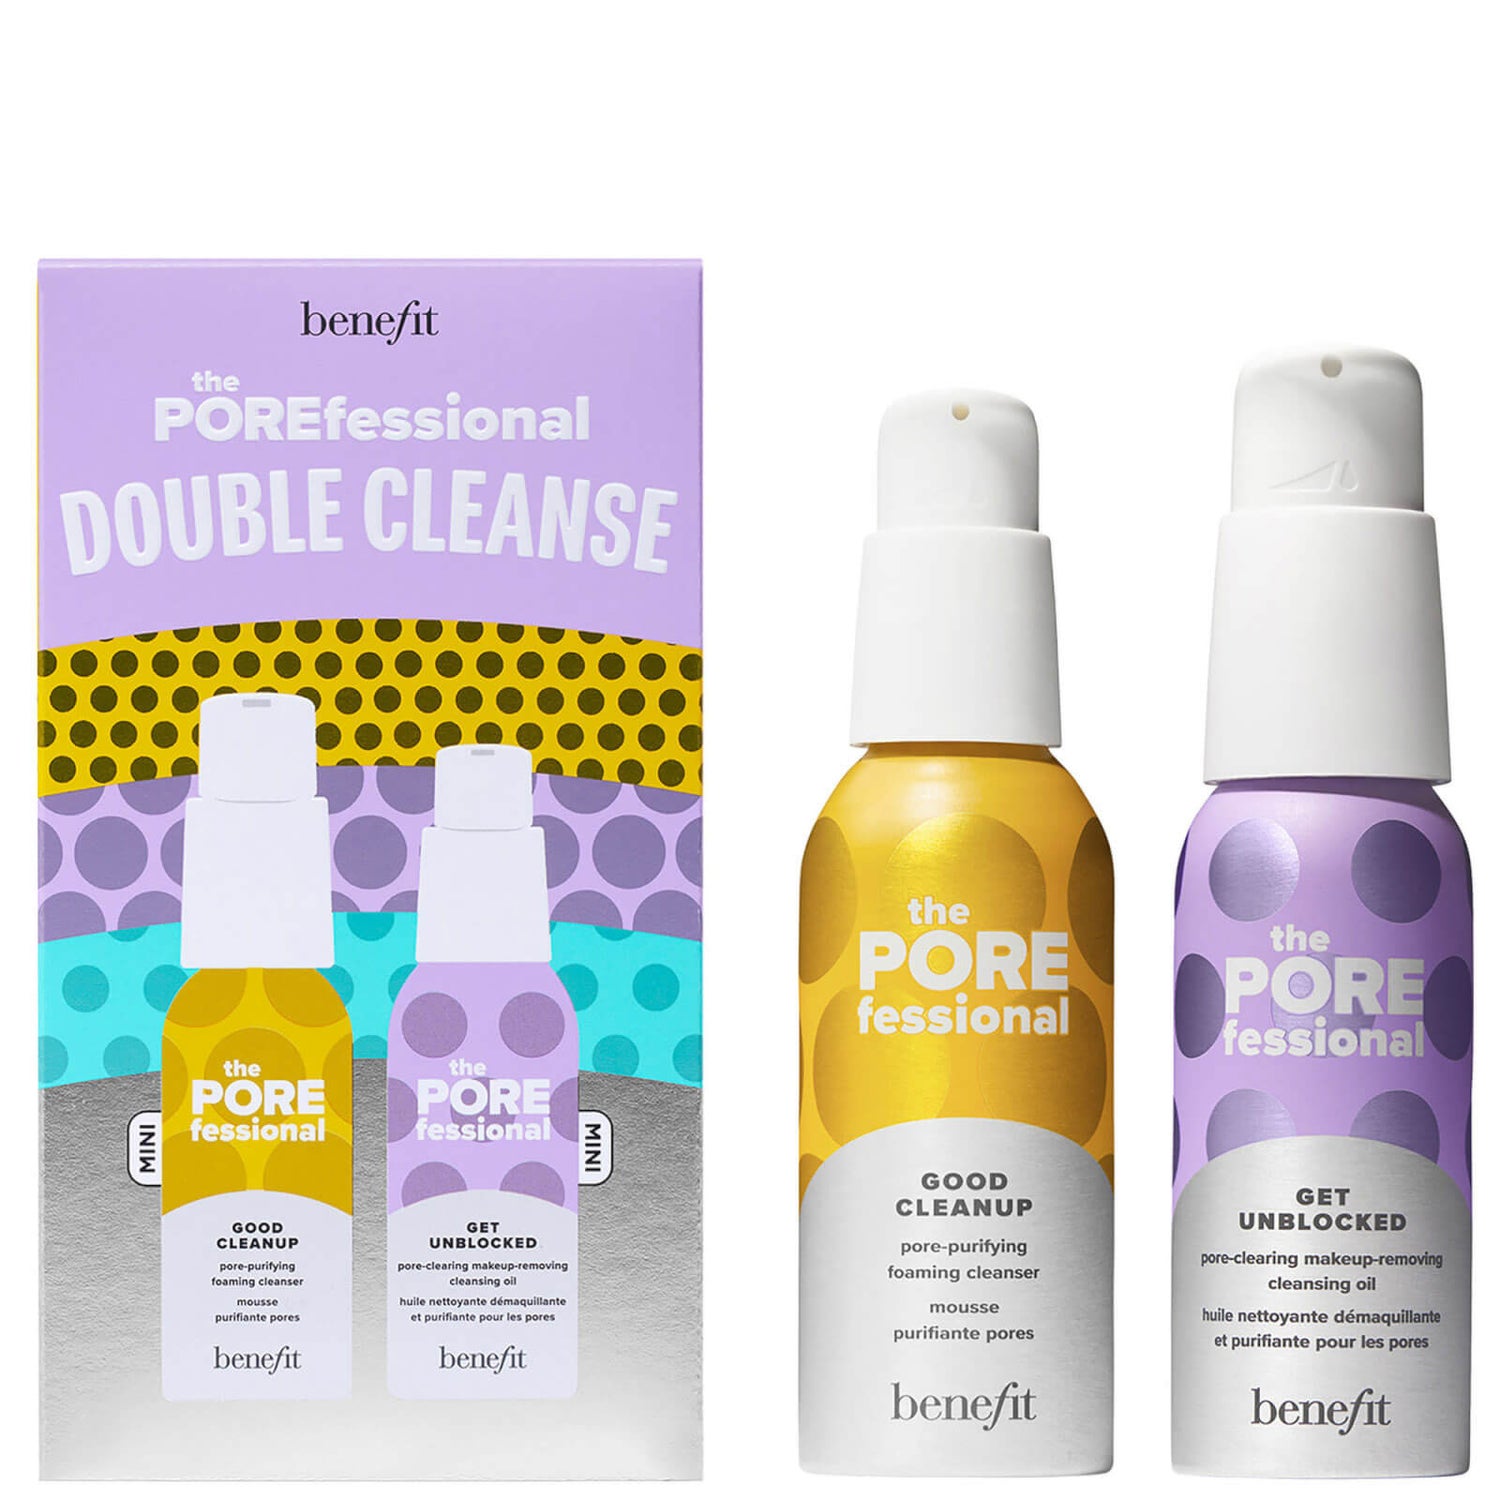 benefit The POREfessional Double Cleanse - Pore Care Set (Worth £29.50)